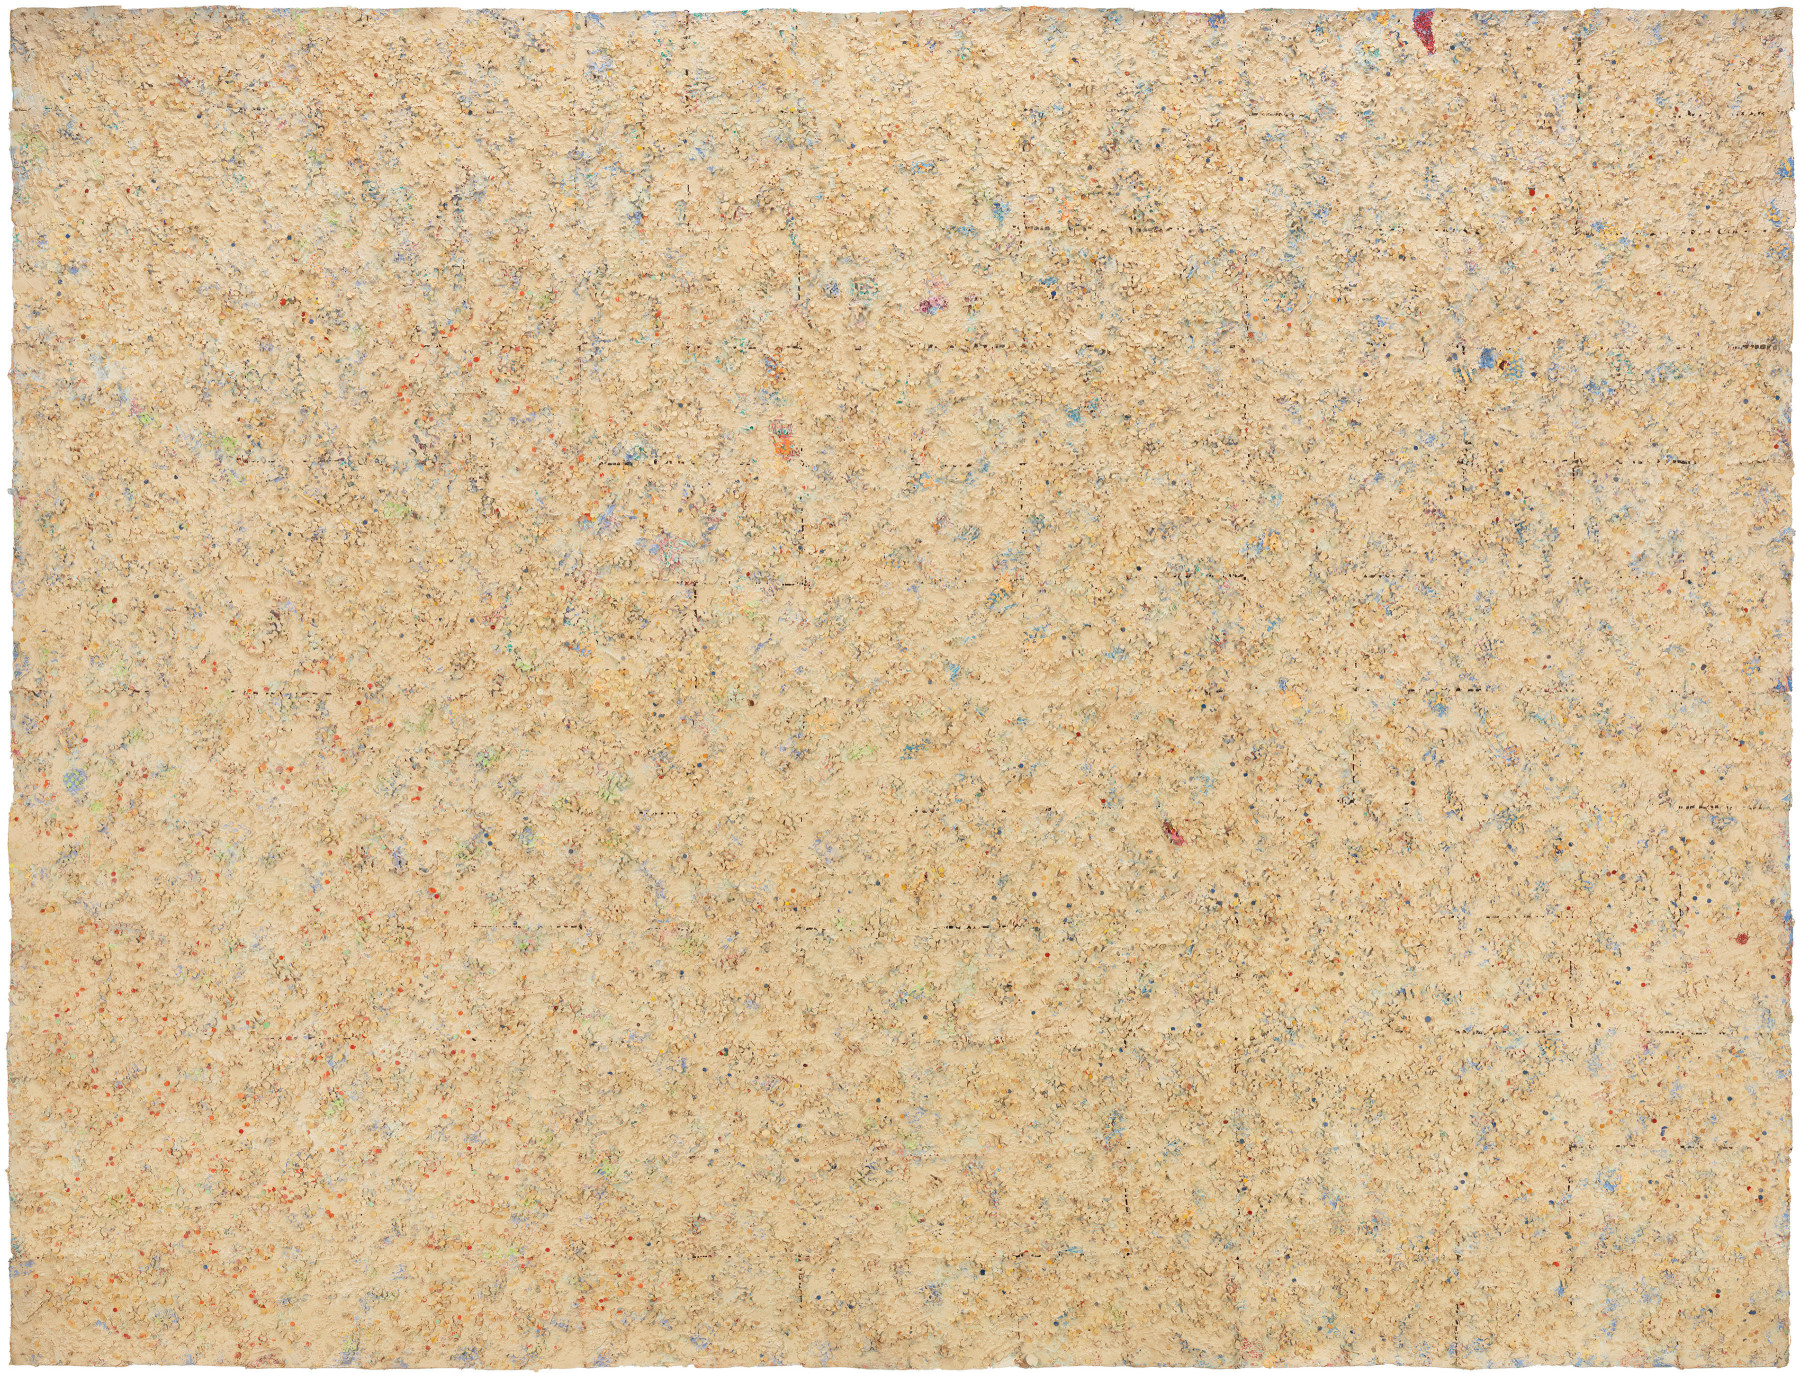 Howardena Pindell, Untitled #20 (Dutch Wives Circled and Squared), 1978